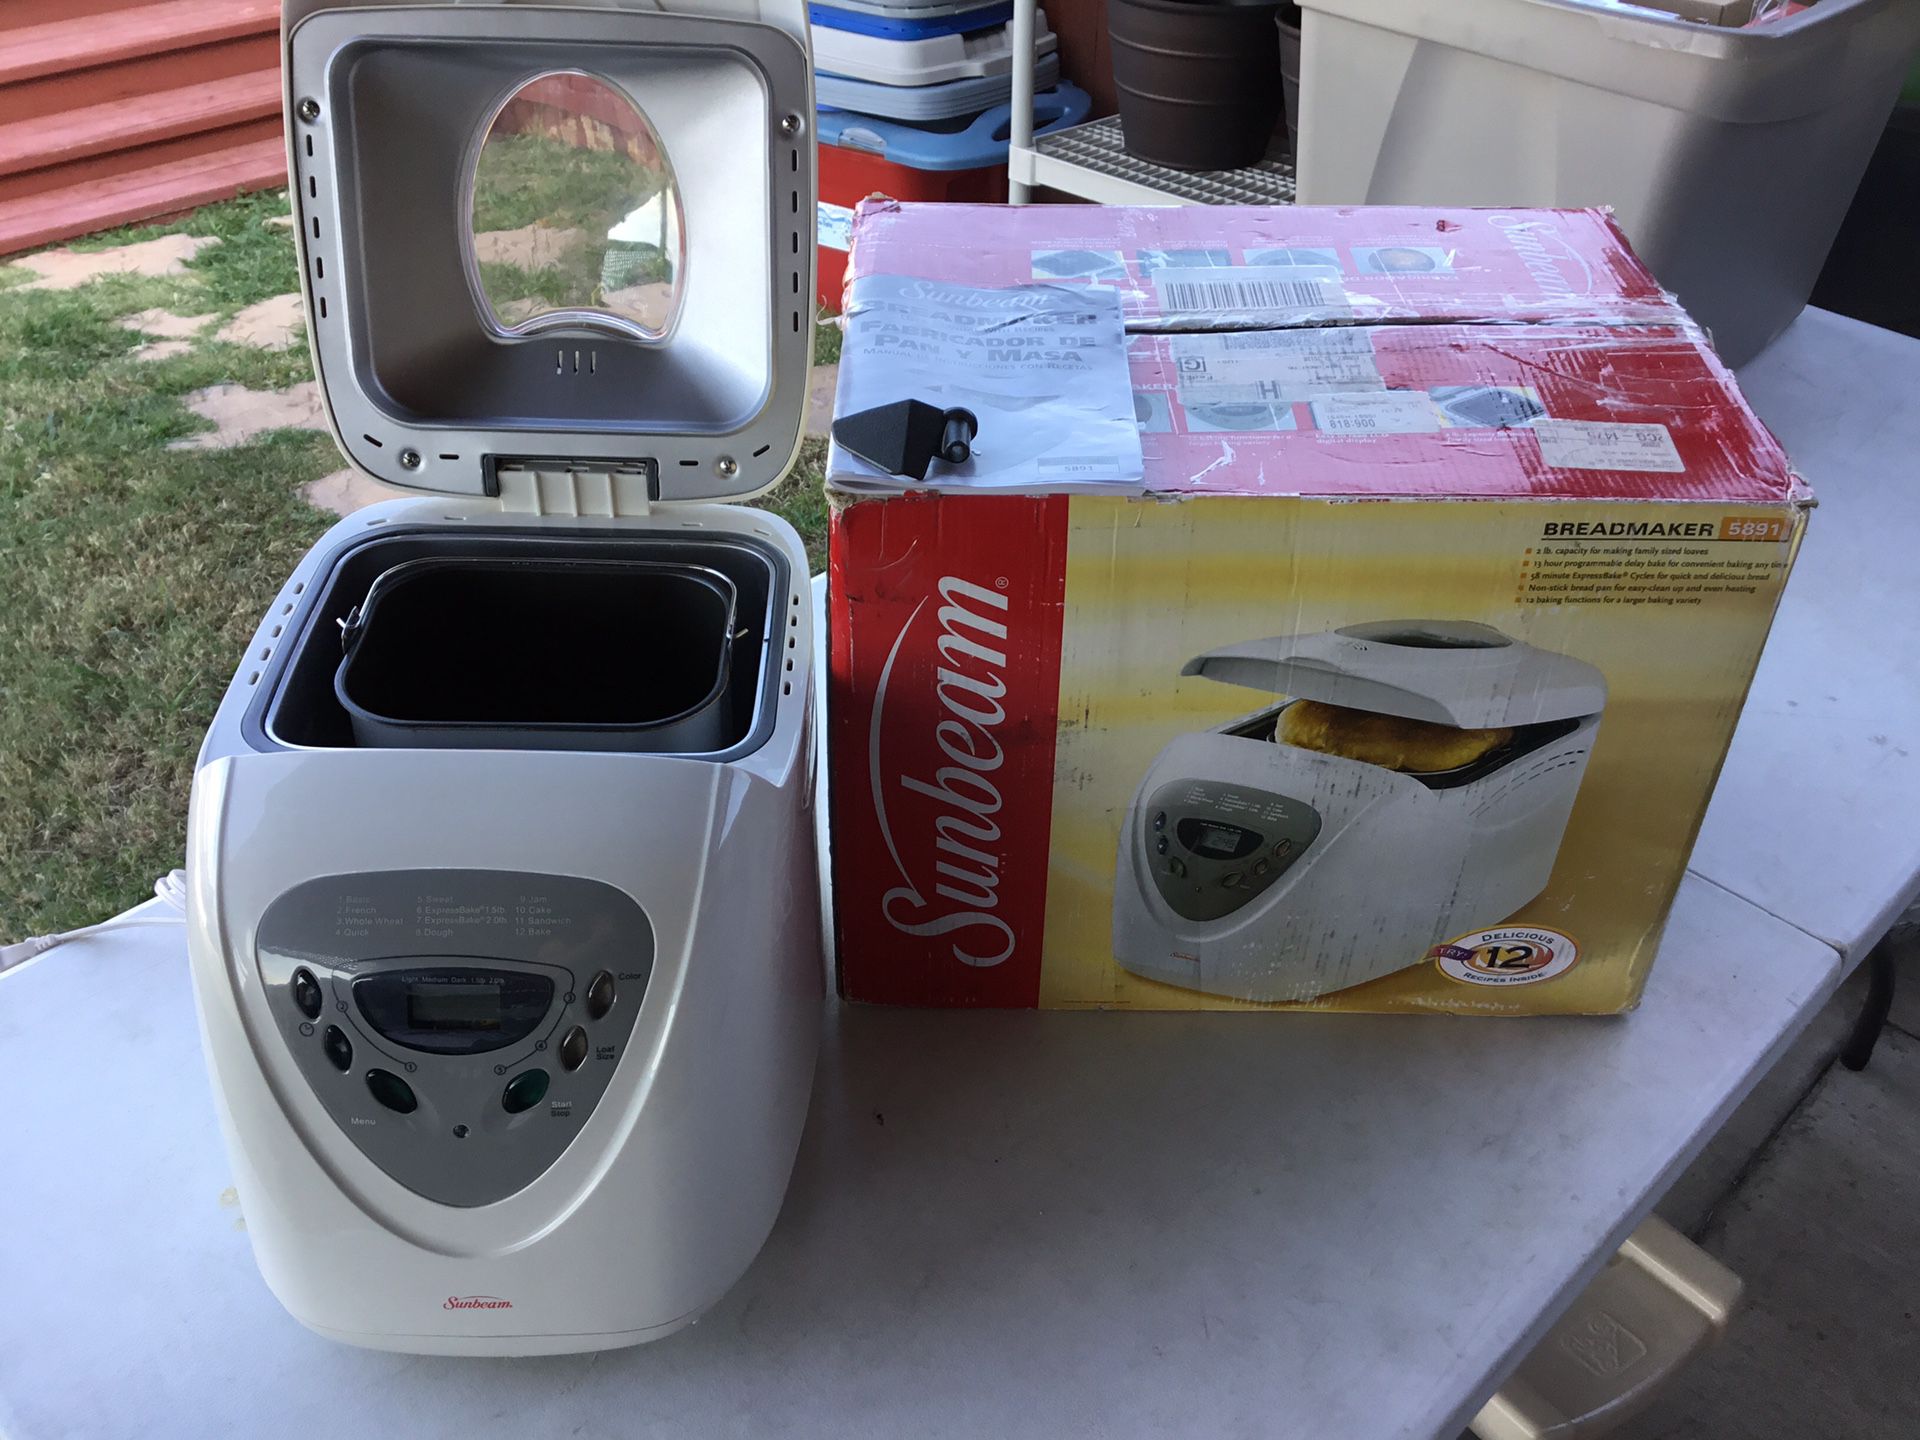 Sunbeam 5891 bread maker. Low use excellent. Sold as pictured